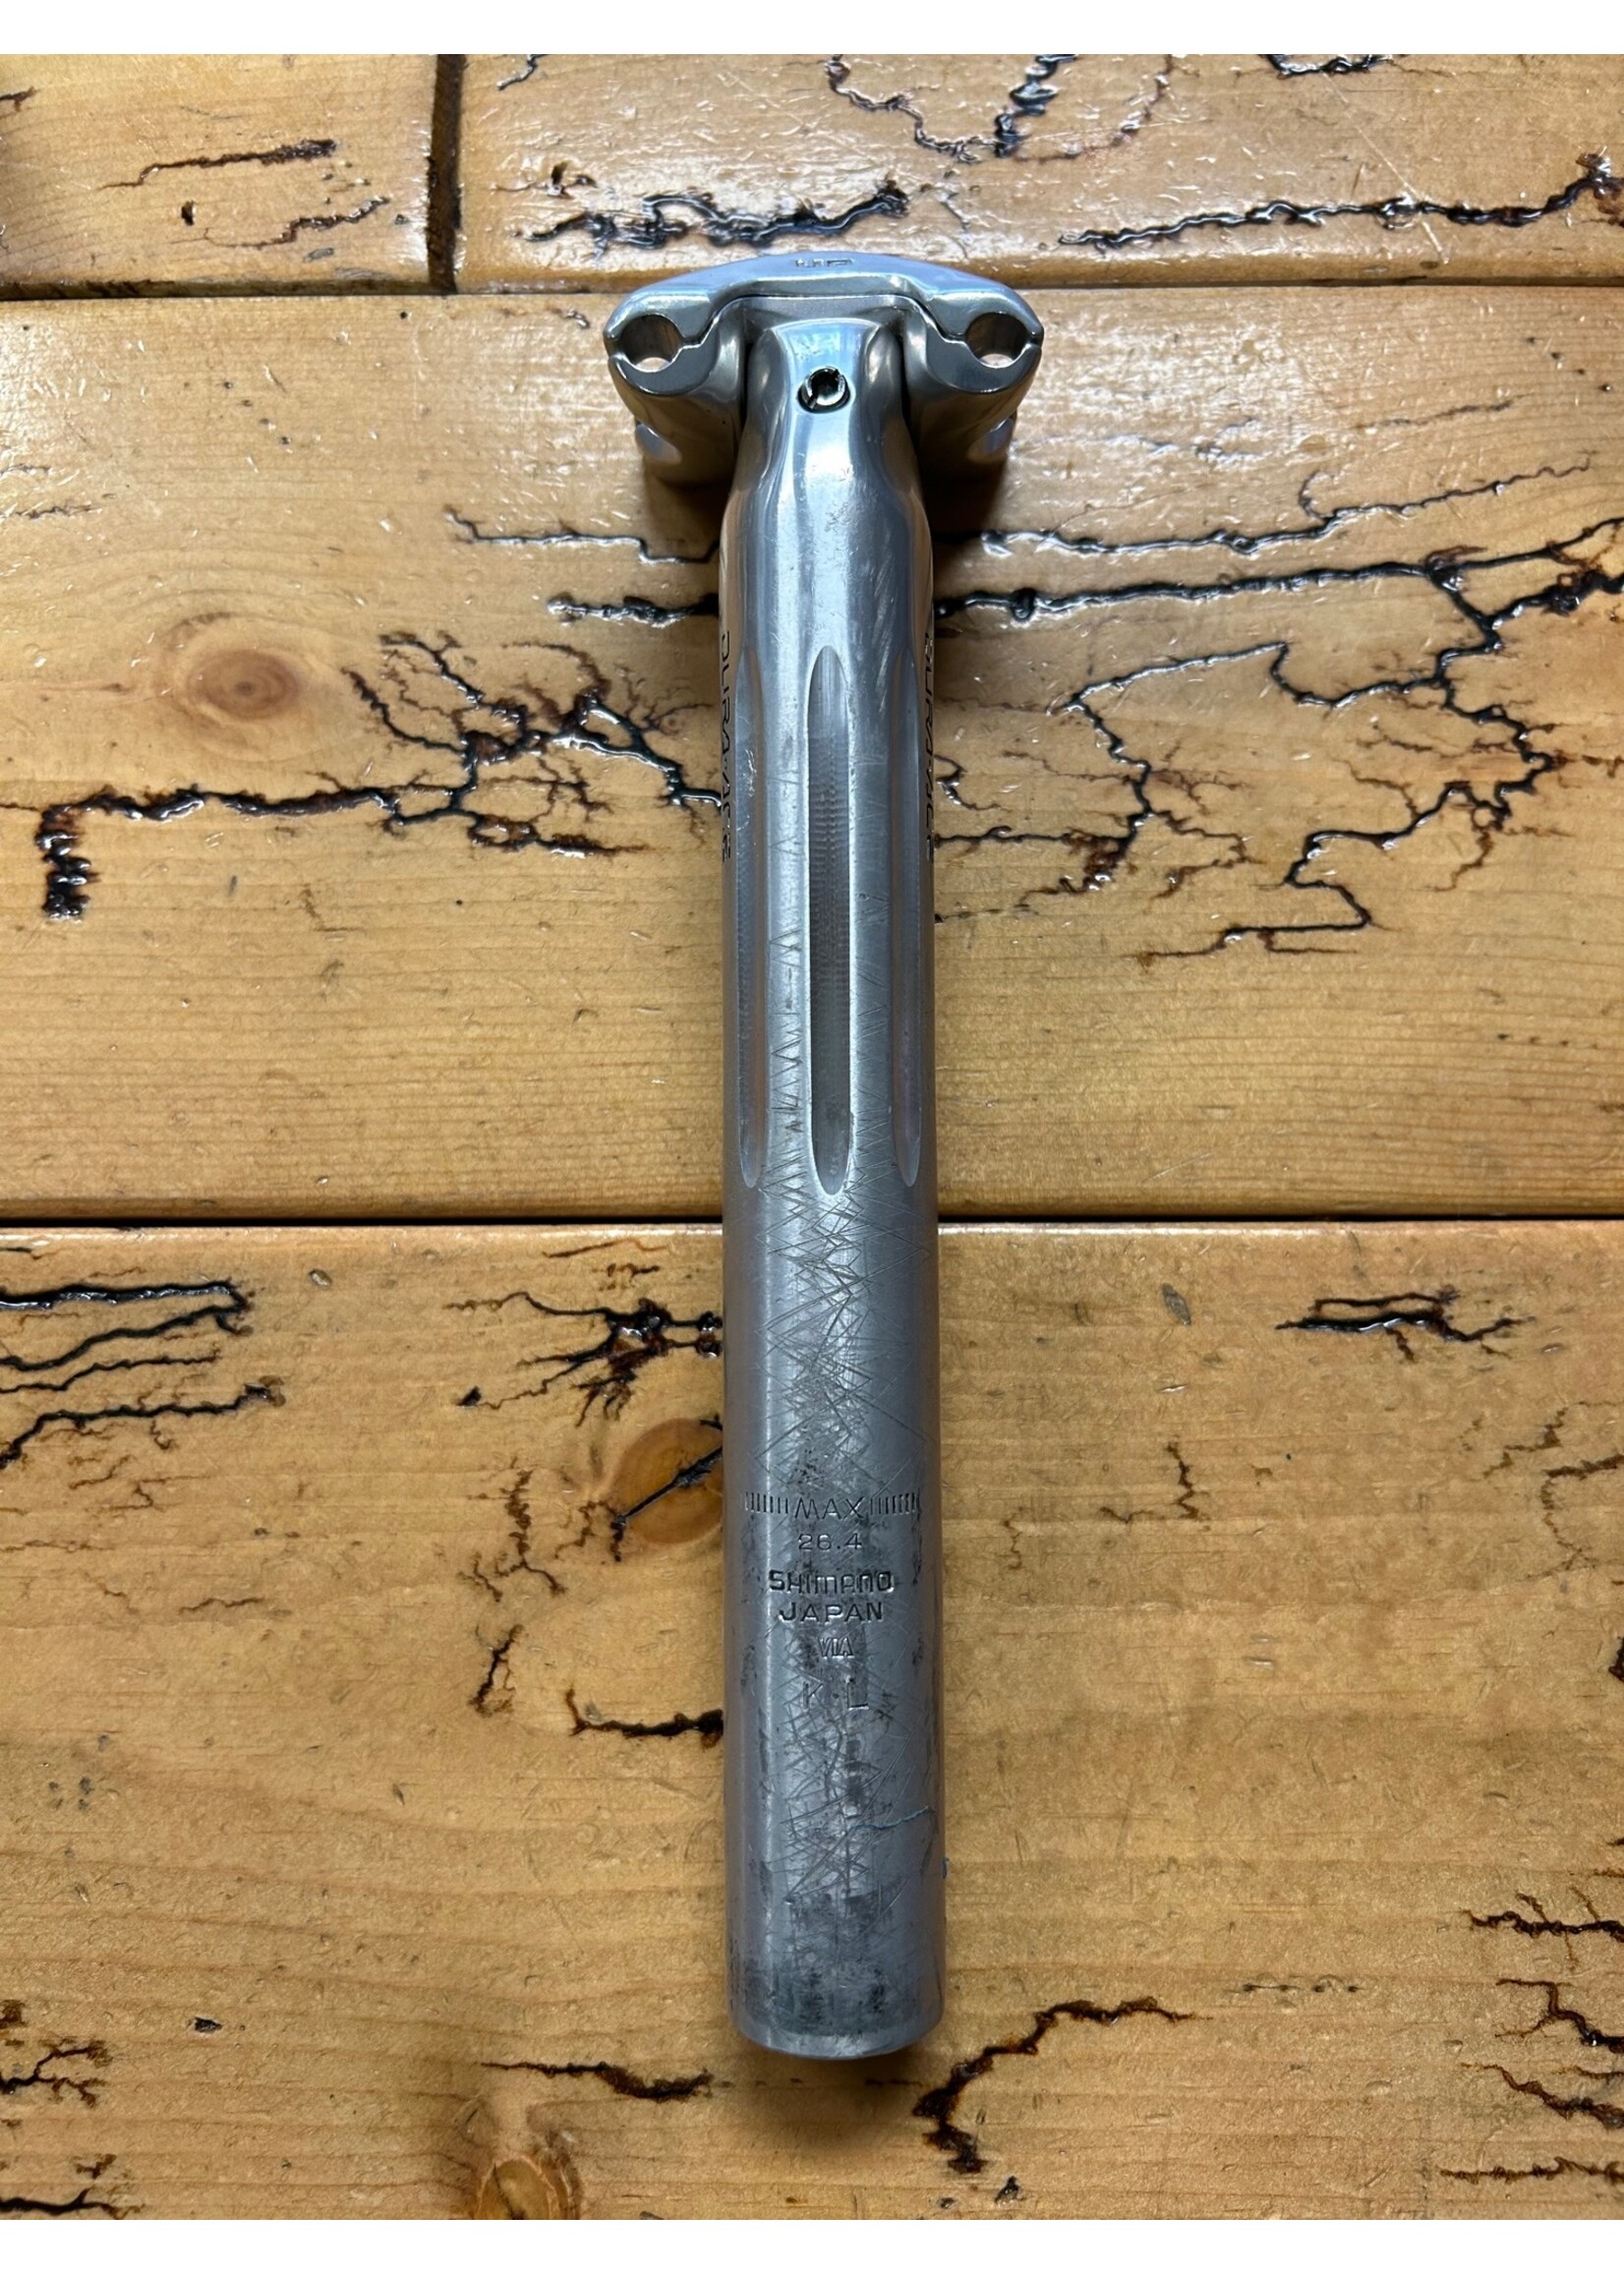 Shimano Dura Ace SP-7400-A 26.4mm Seatpost - Gringineer Cycles